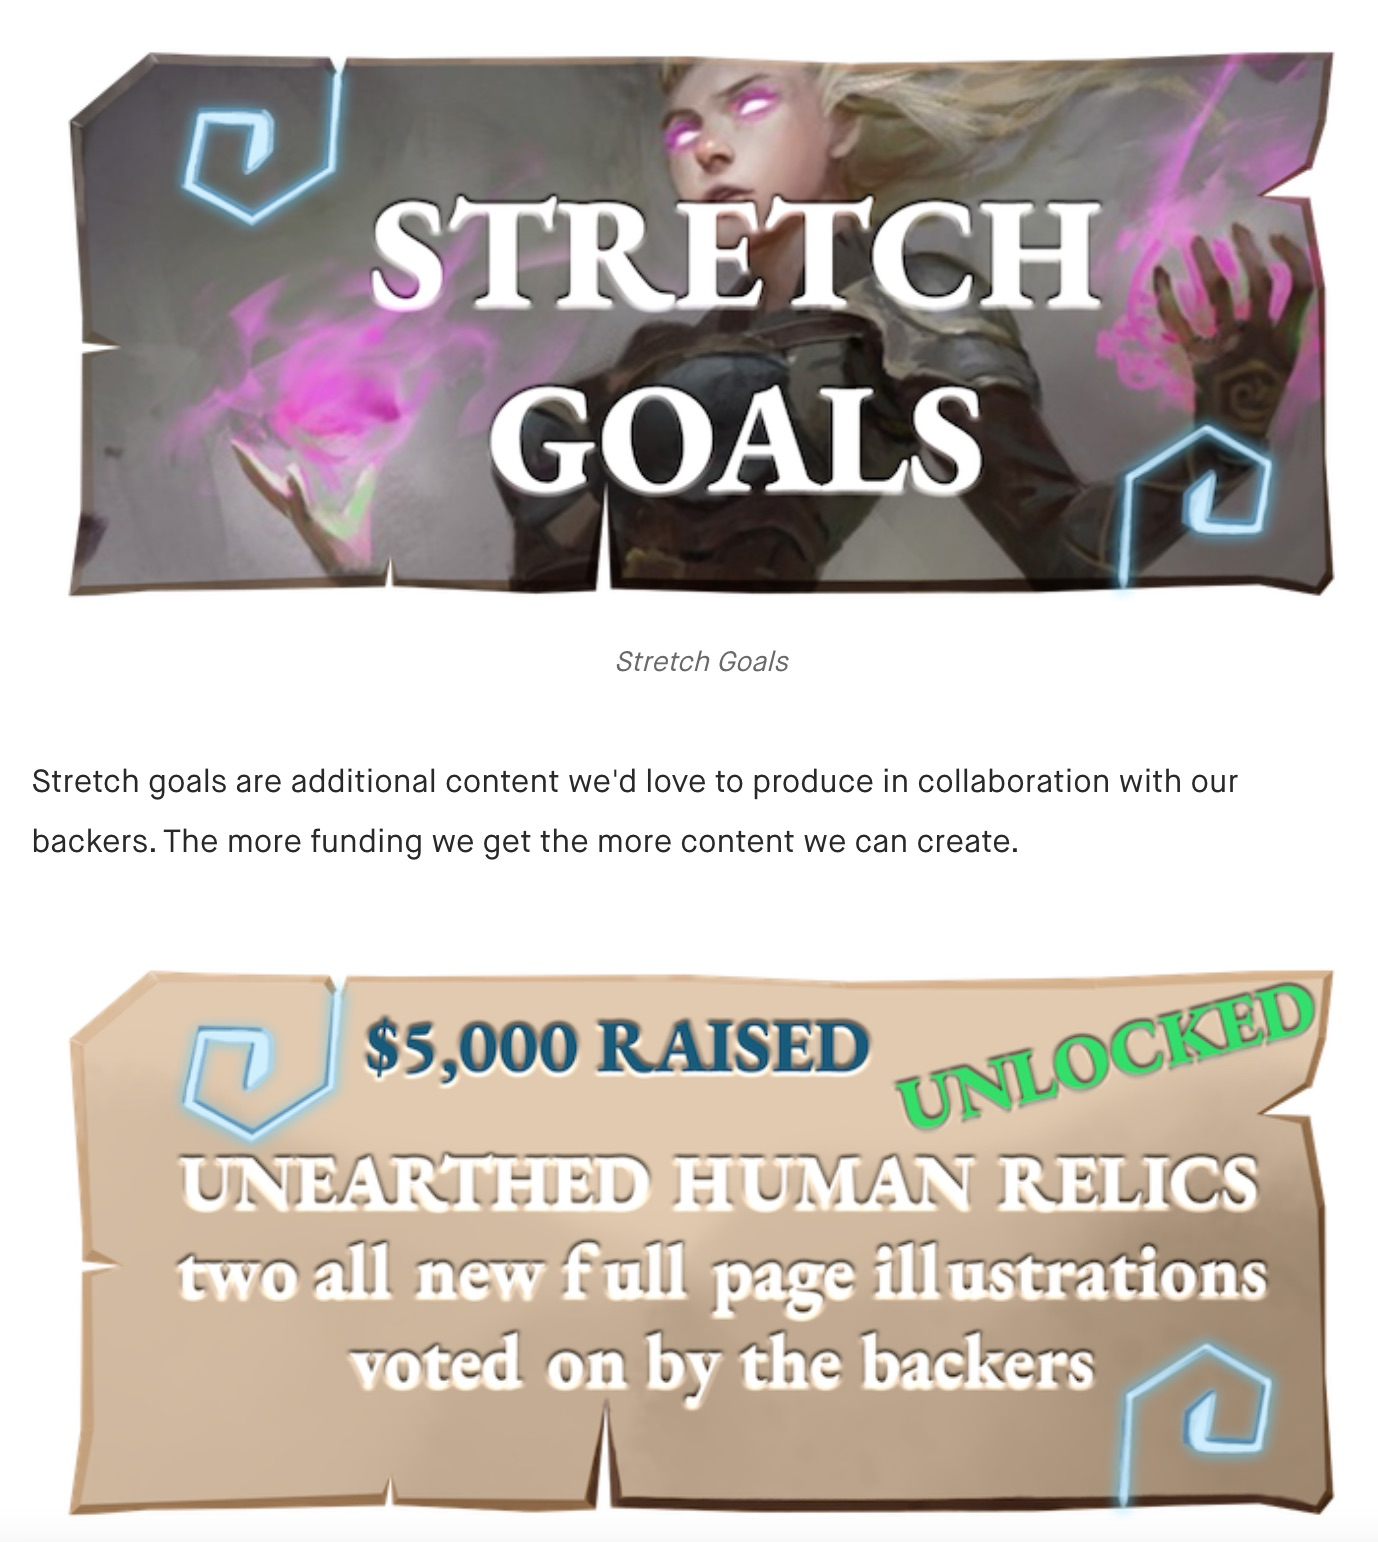 an example of a stretch goal idea to illustrate how it works from the Creed’s Codex campaign with illustrations that will be released if the campaign reaches $5000.